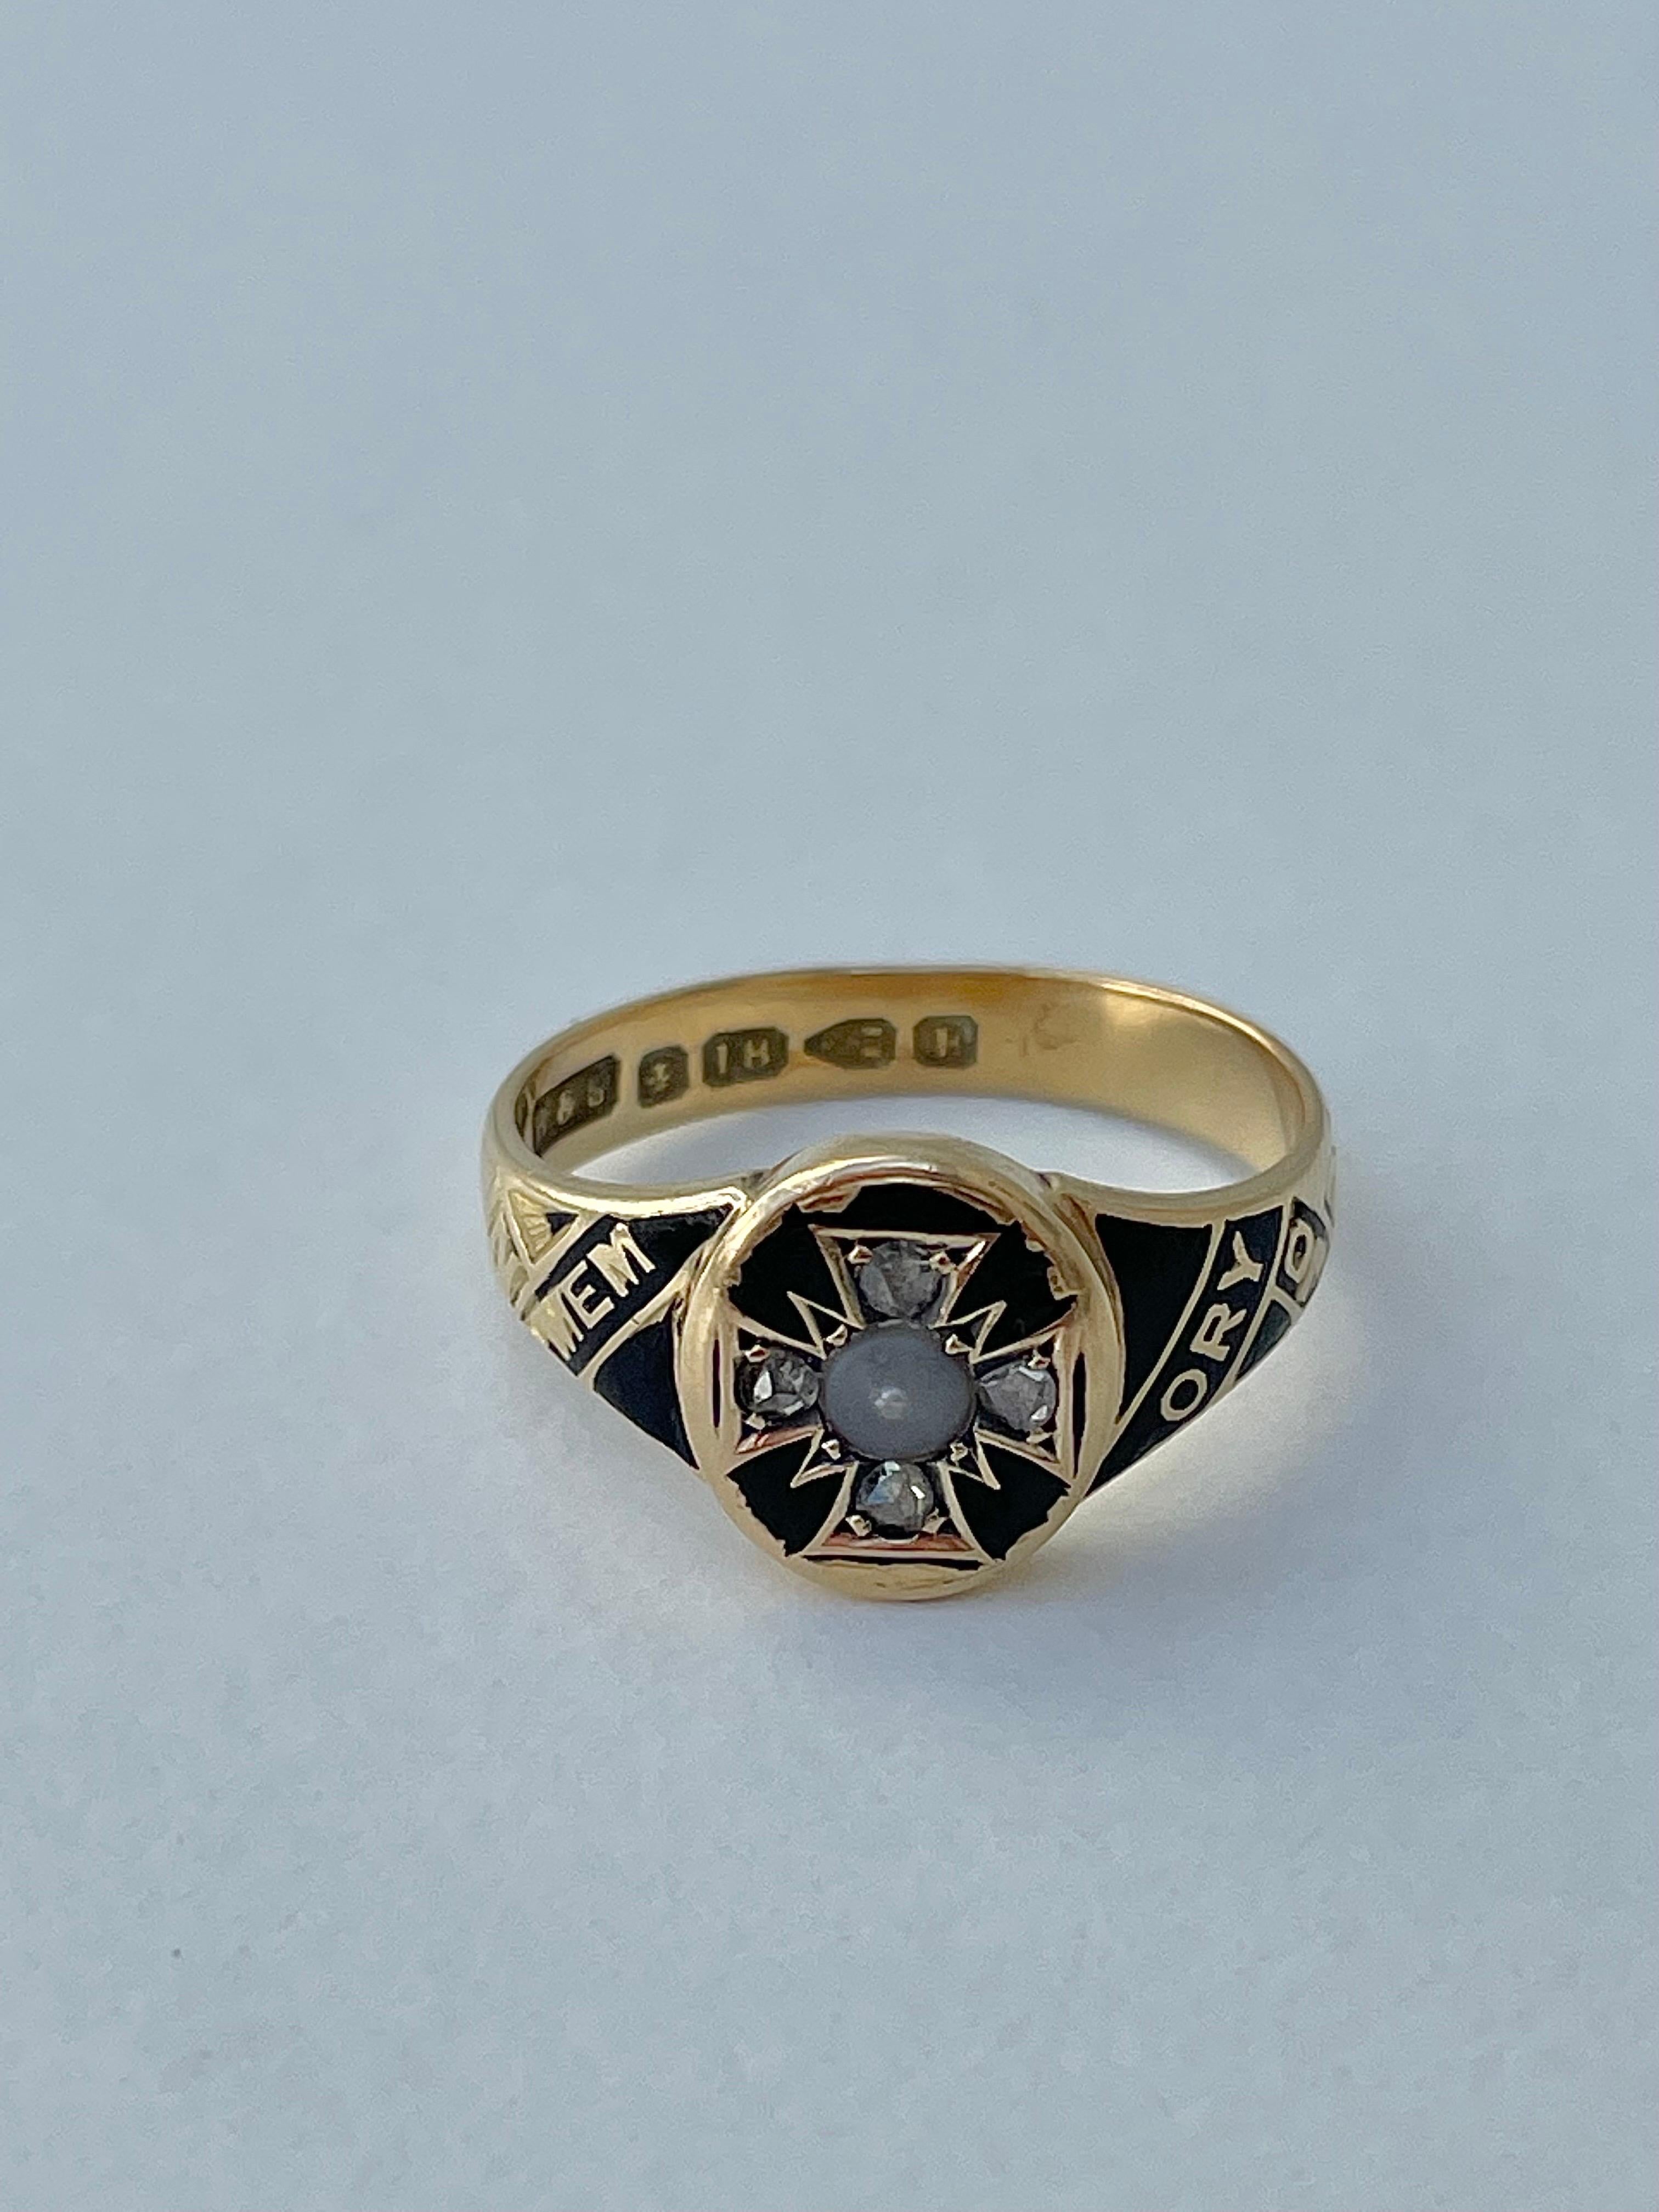 Antique Black Enamel Memory Ring with Pearl and Rose Cut Diamond, 18ct Yellow Gold 

inscribed “my dear parents who died sept 19th 1877 & march 27th 1886” 

sweet and charming ring 

The item comes without the box in the photos but will be presented